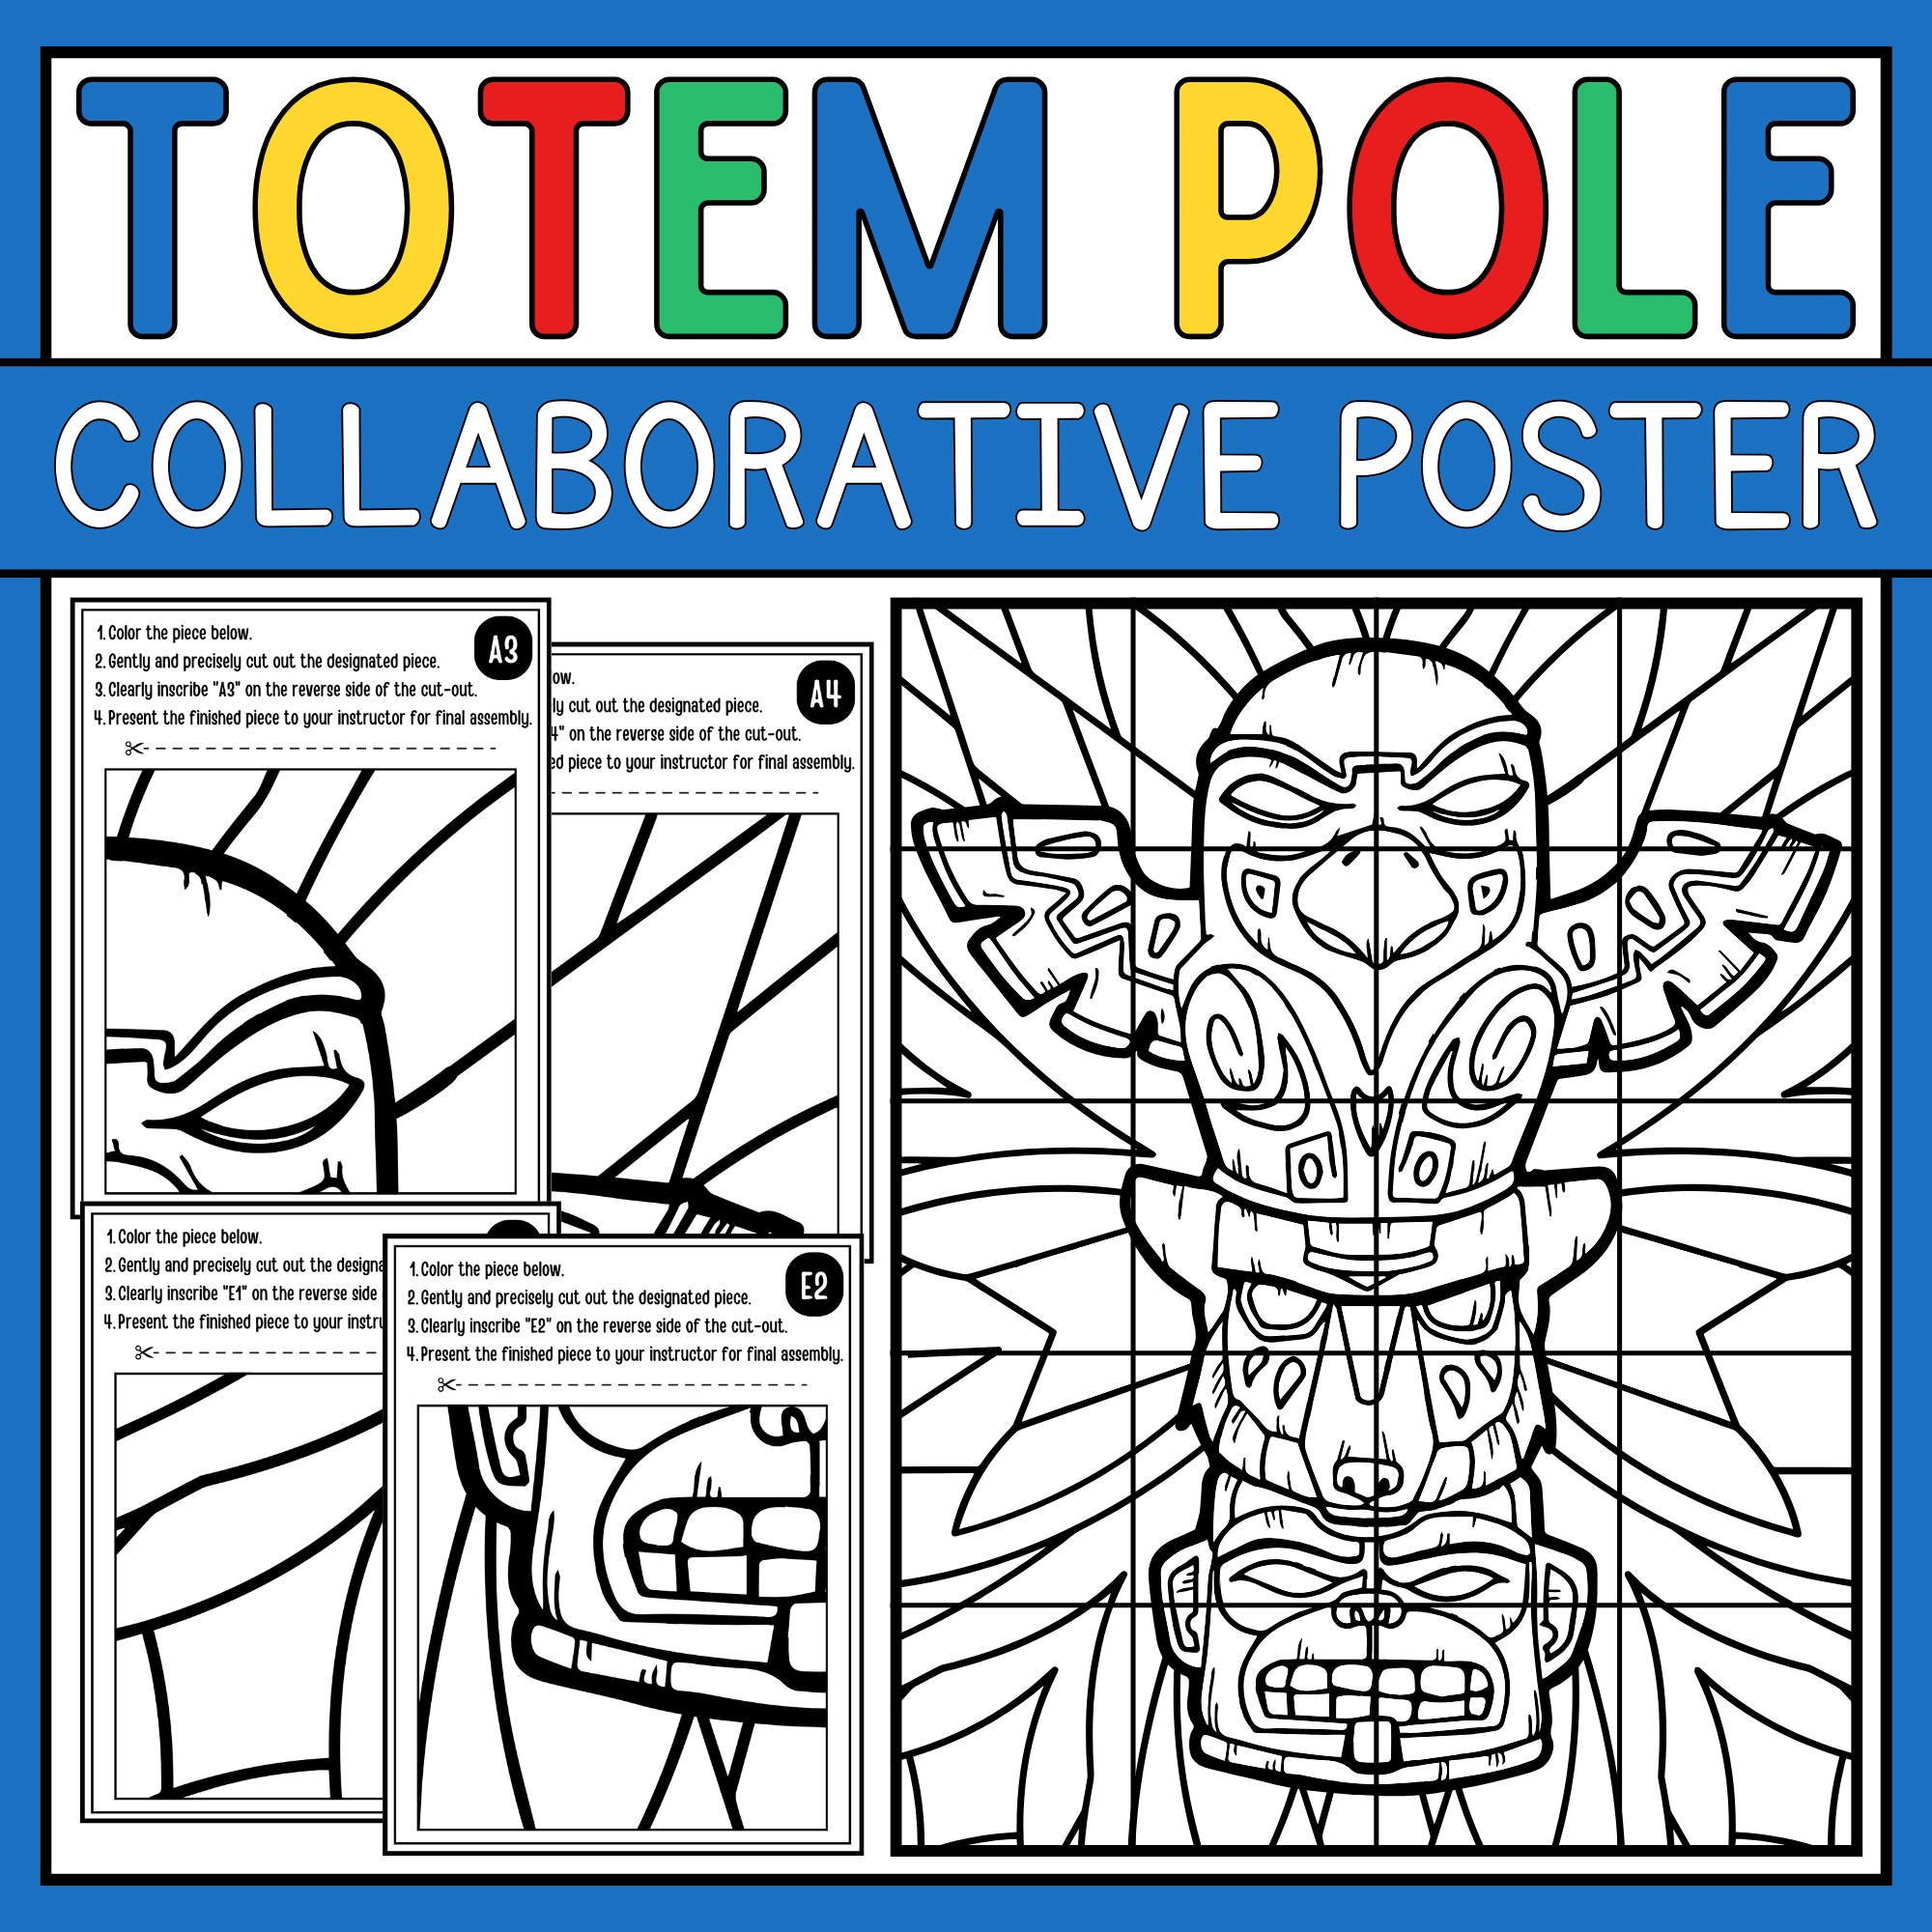 Totem pole collaborative poster native american heritage month activities made by teachers